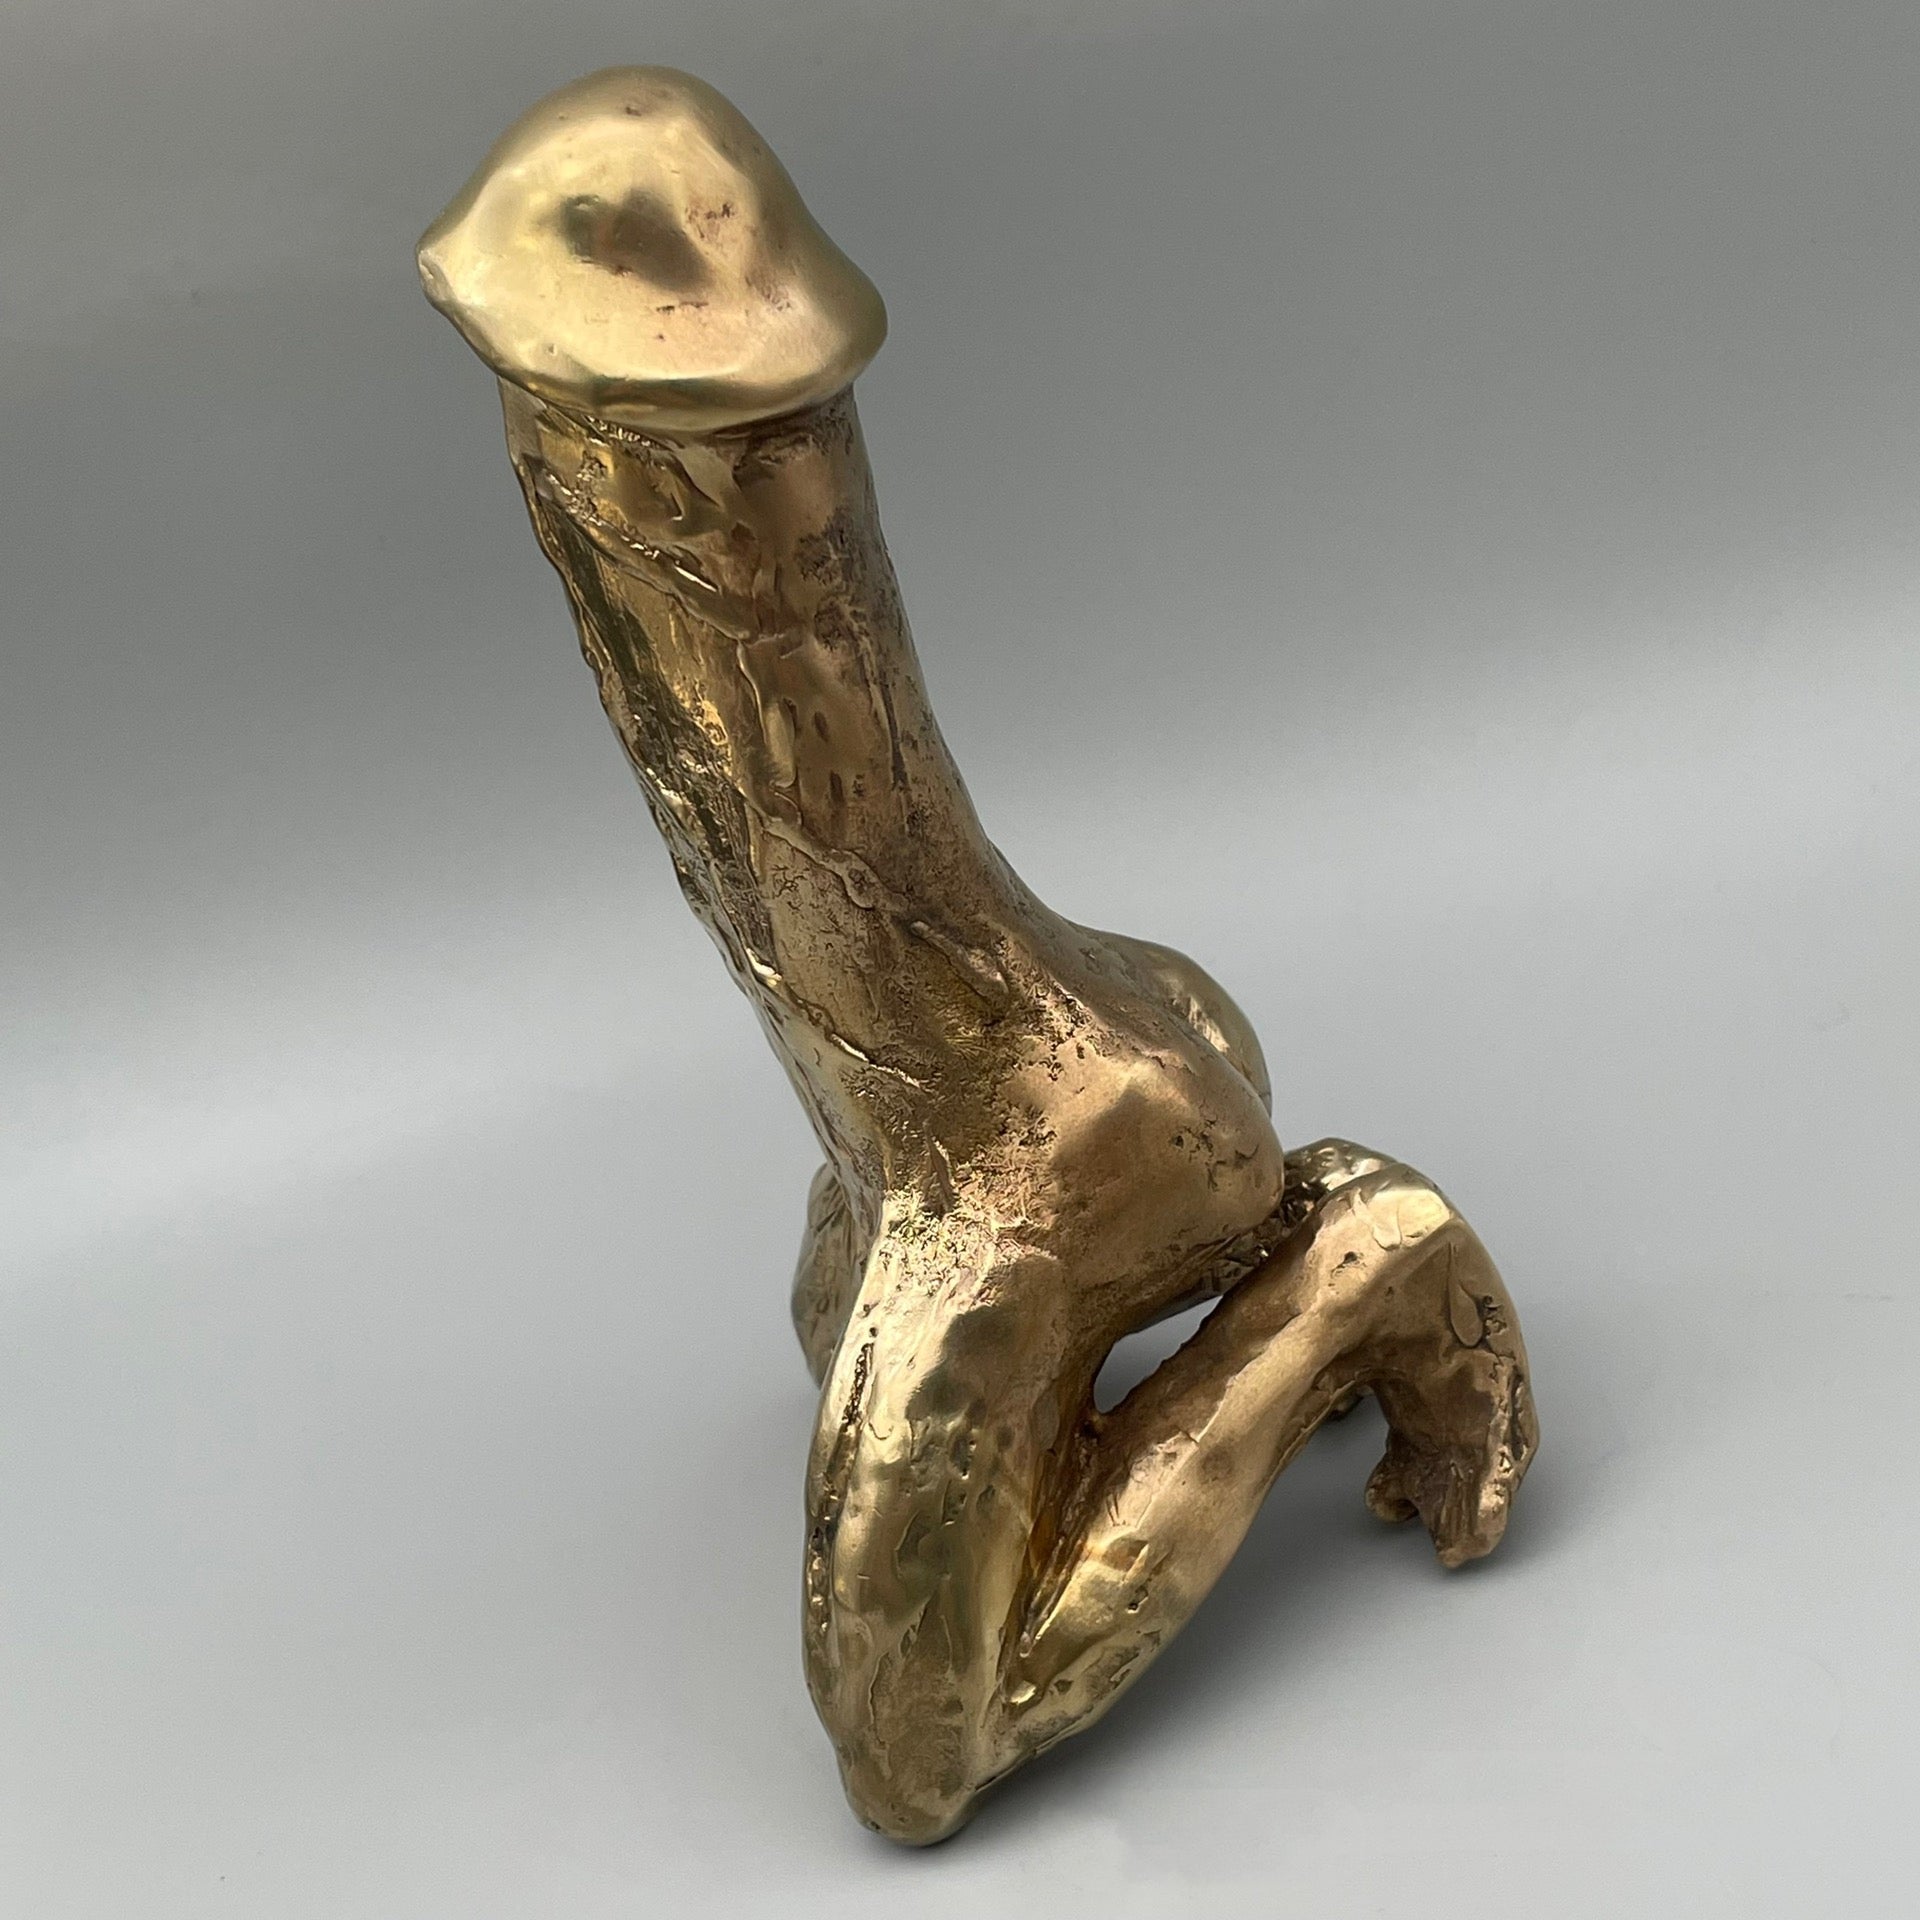 Brass Penis Sculpture,Dick Statue,Student Room Decor,Living Room Decorative Ornaments Ornaments,Christmas Gifts